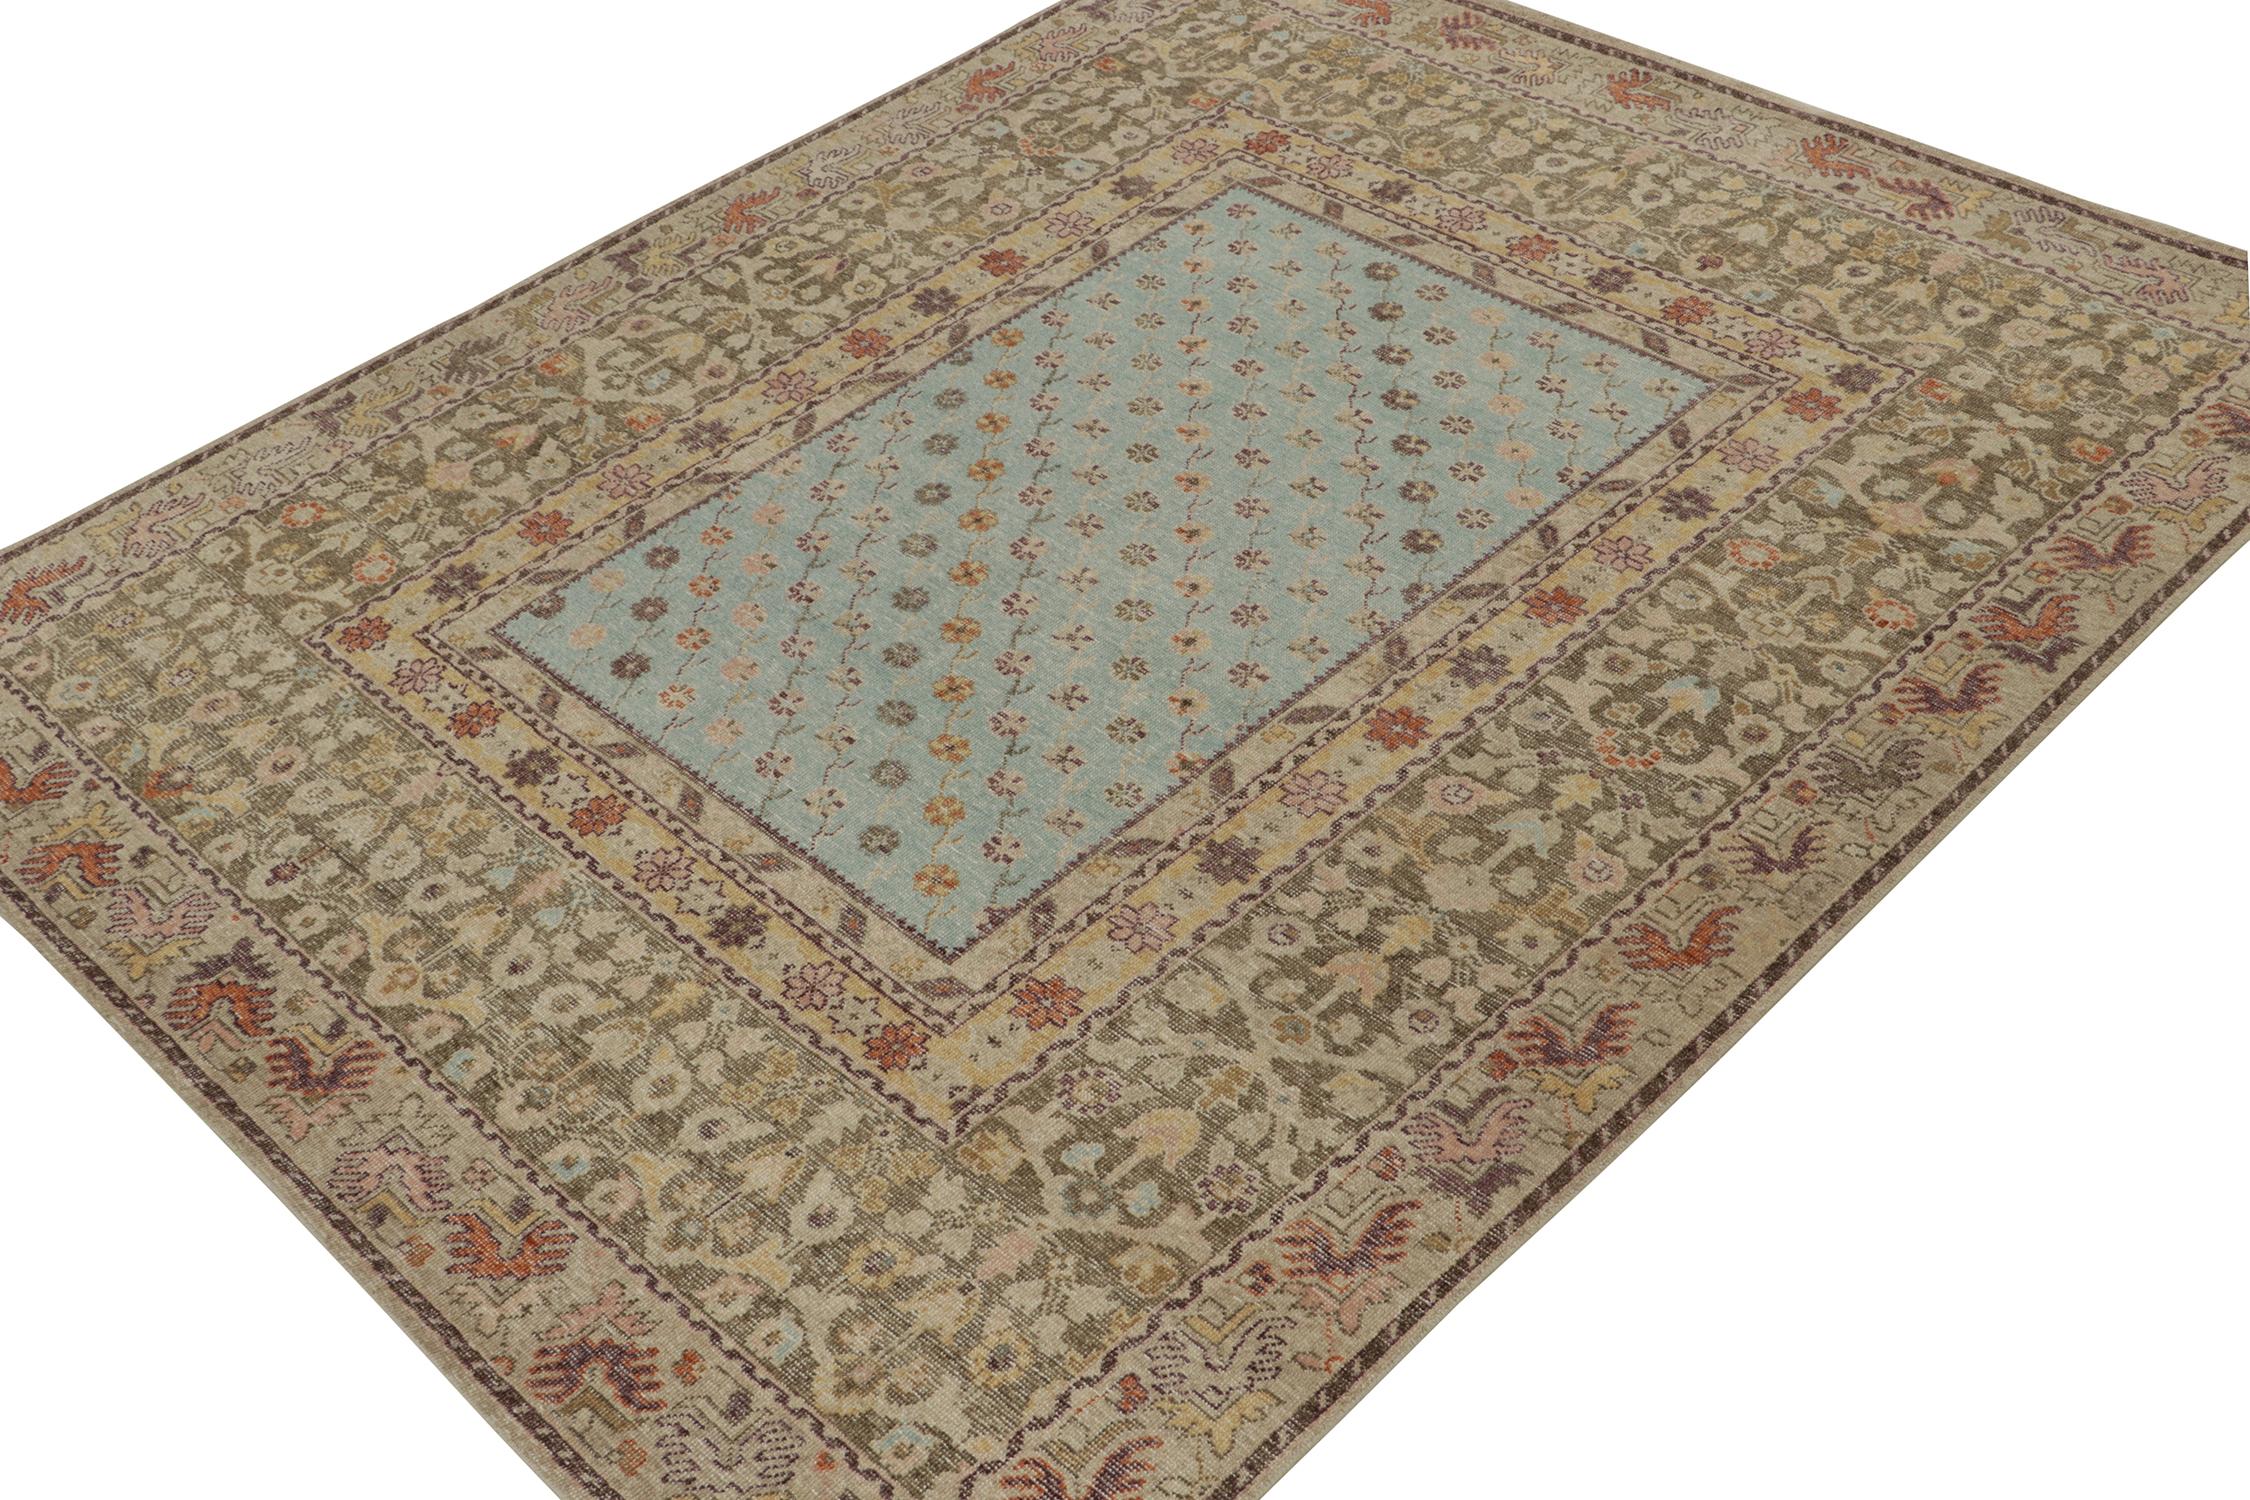 This 8x10 rug is a new addition to Rug & Kilim’s Homage Collection—a refreshing take on distressed style. Hand-knotted in wool and cotton.

Further On the Design:

This design draws on antique tribal rugs, and hosts a cool sky-blue field dense